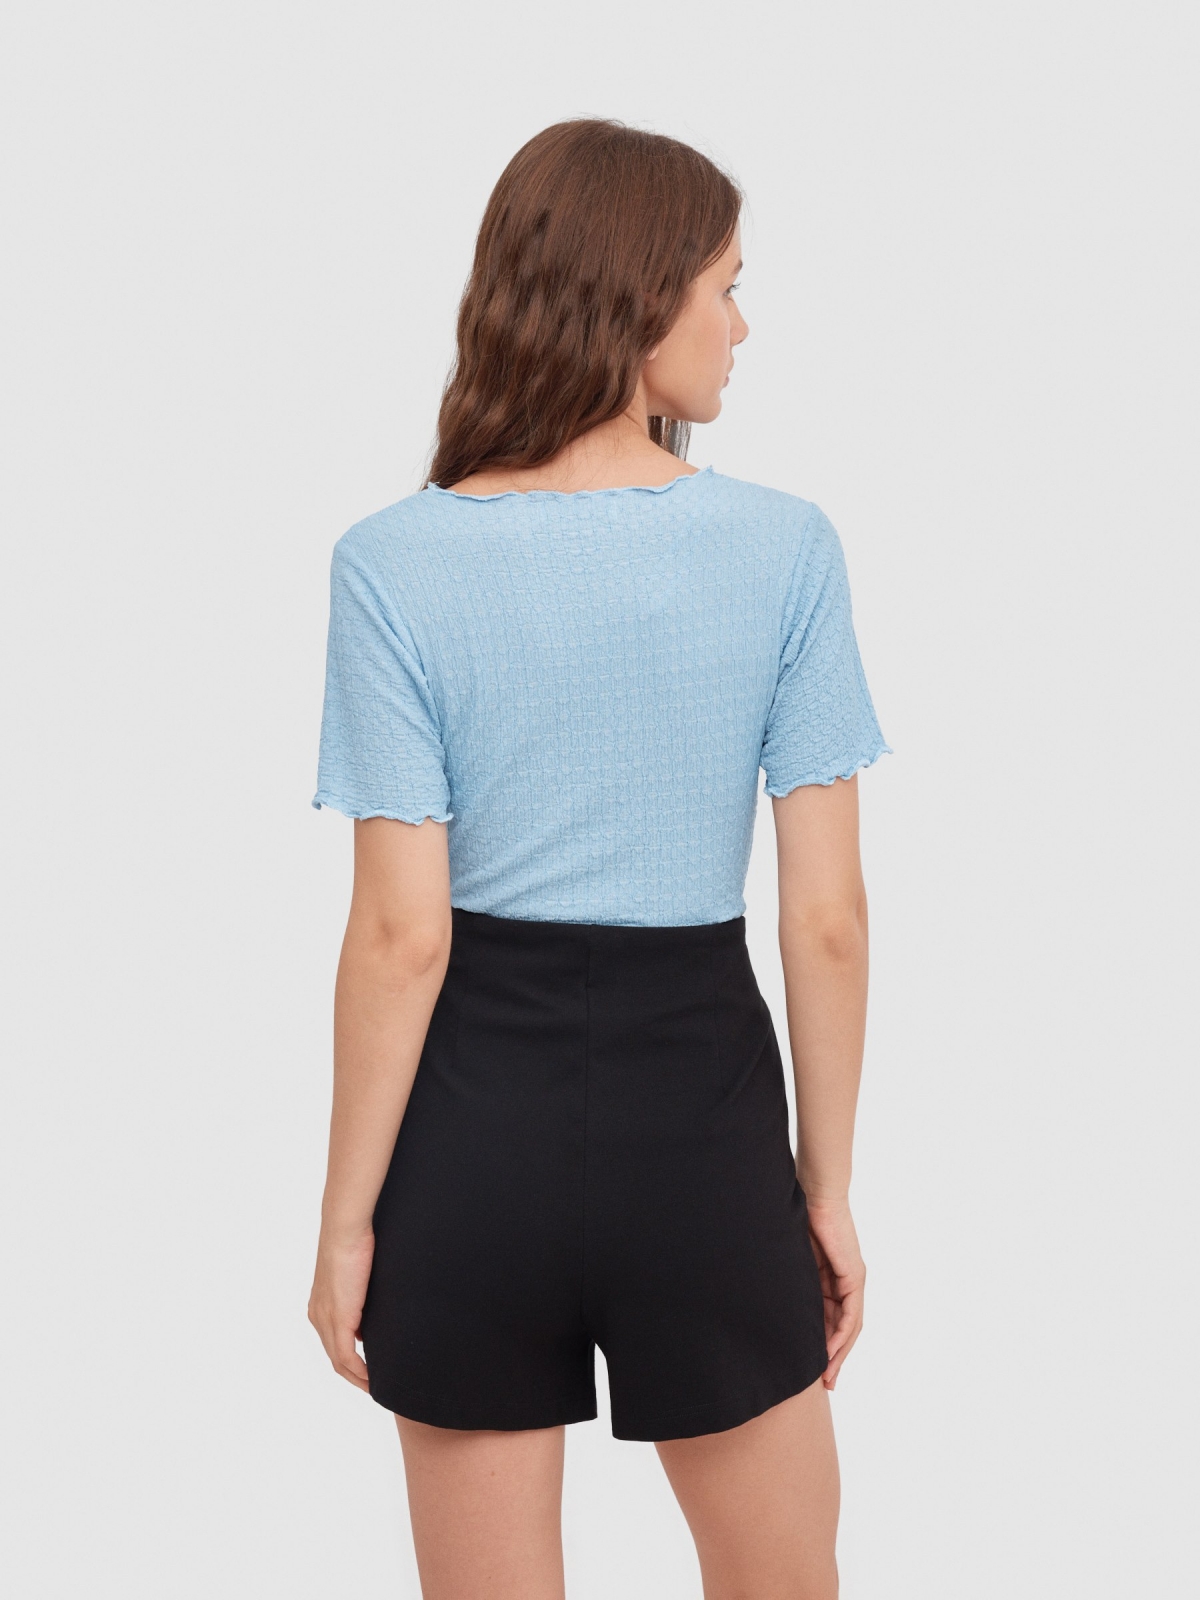 Textured T-shirt blue middle back view